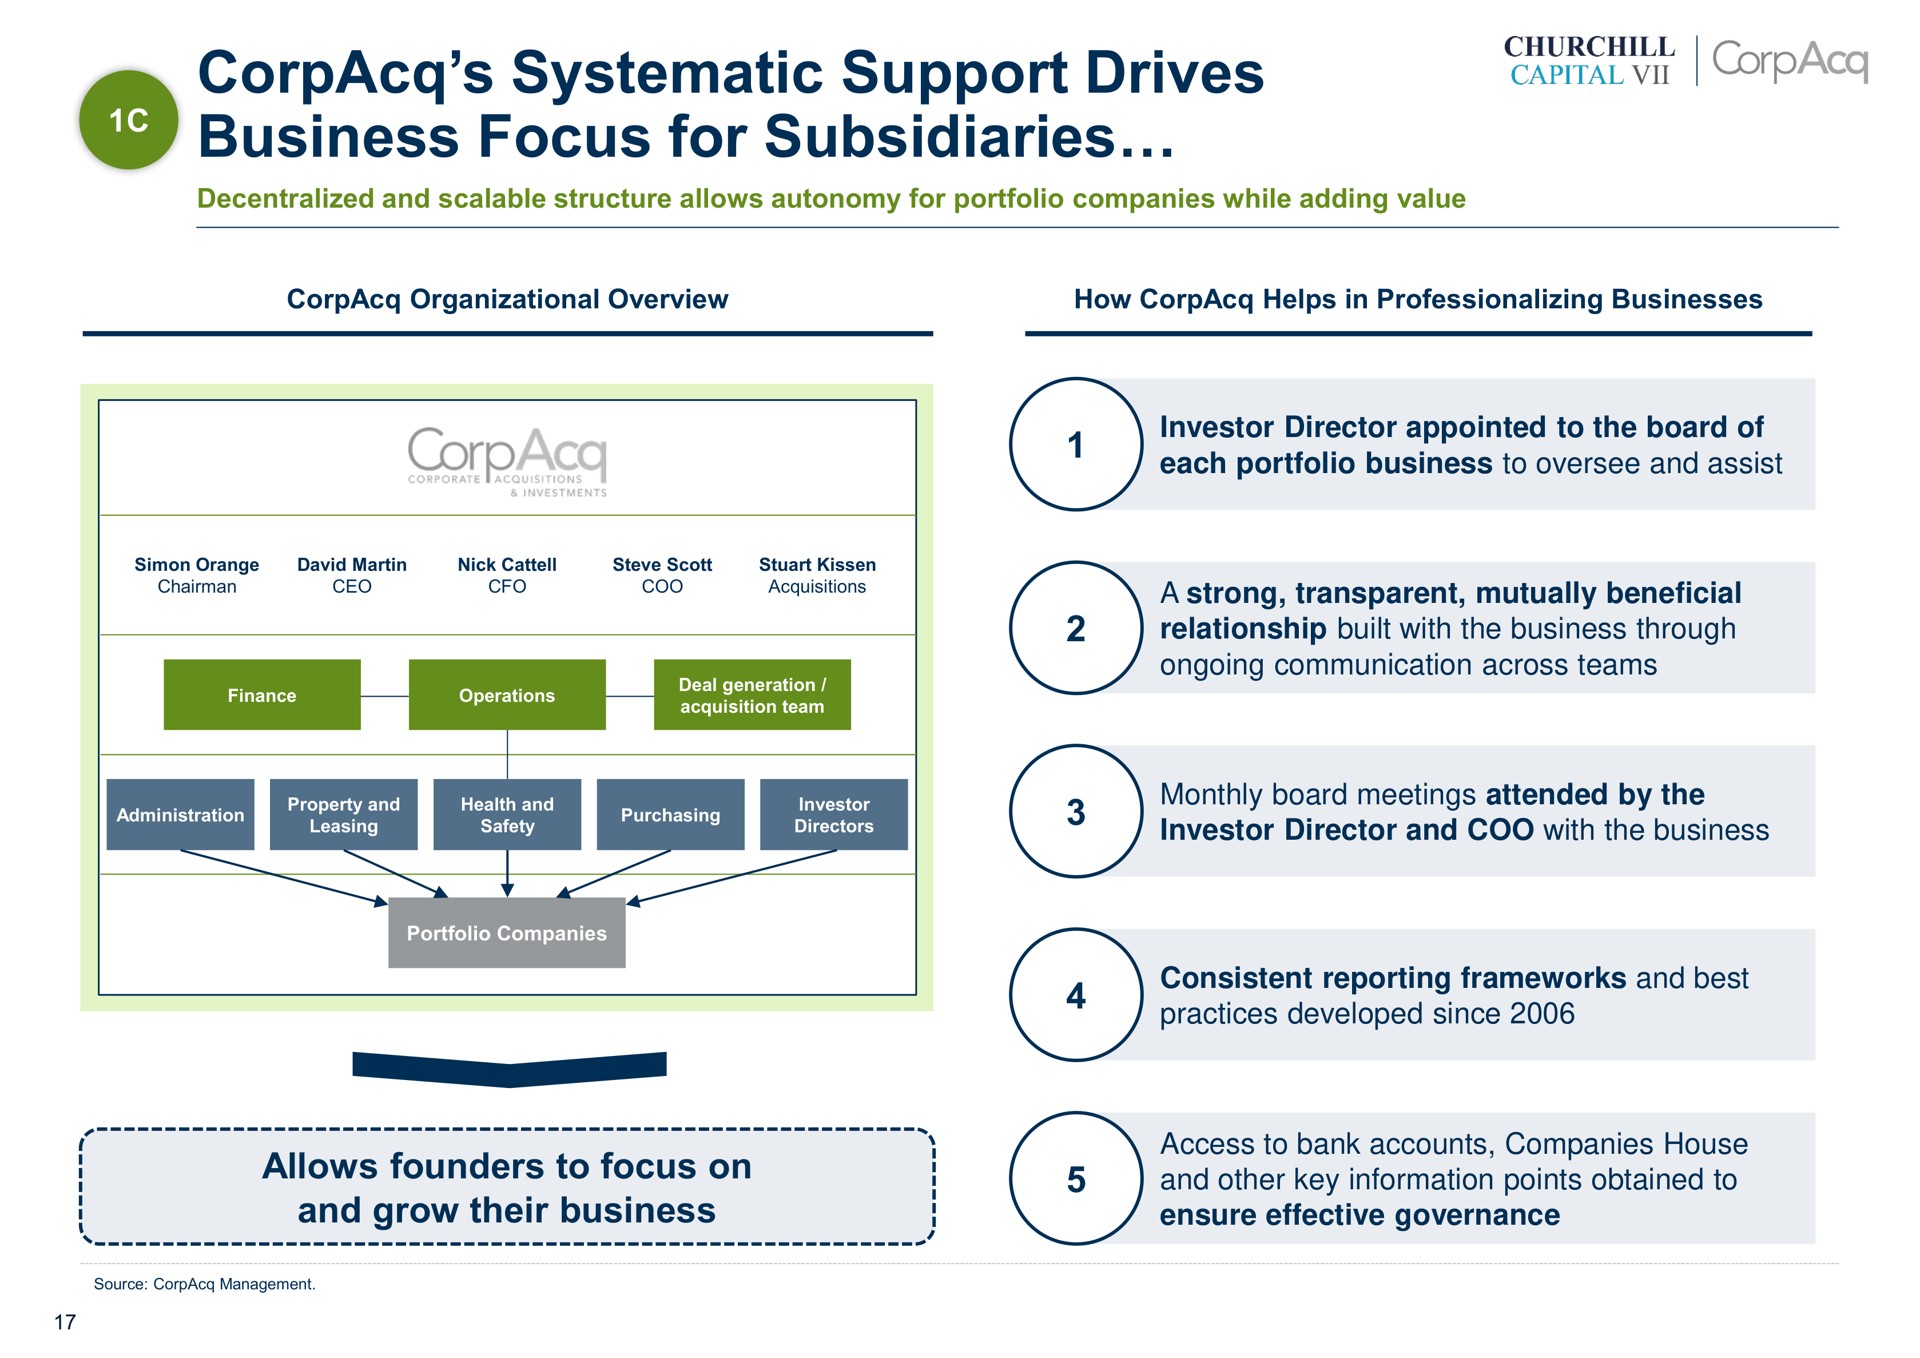 systematic support drives business focus for subsidiaries allows founders to focus on and grow their business i i i i | CorpAcq